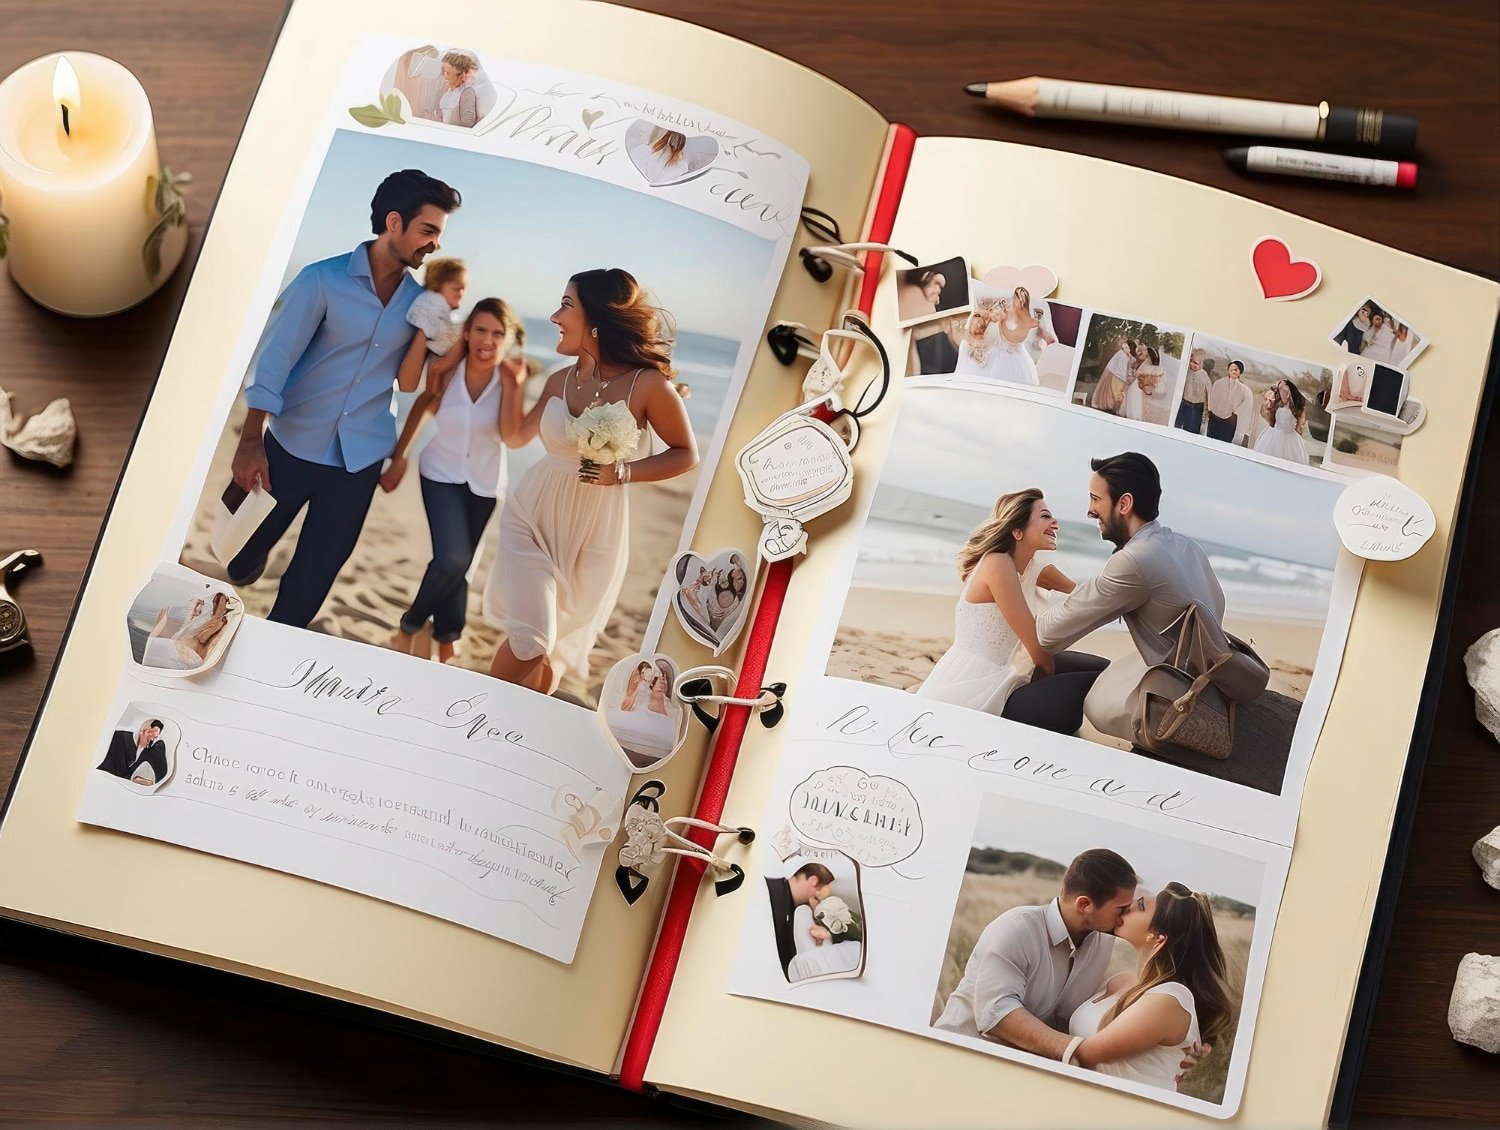 You are currently viewing Photobook Personalized Photo Keepsakes